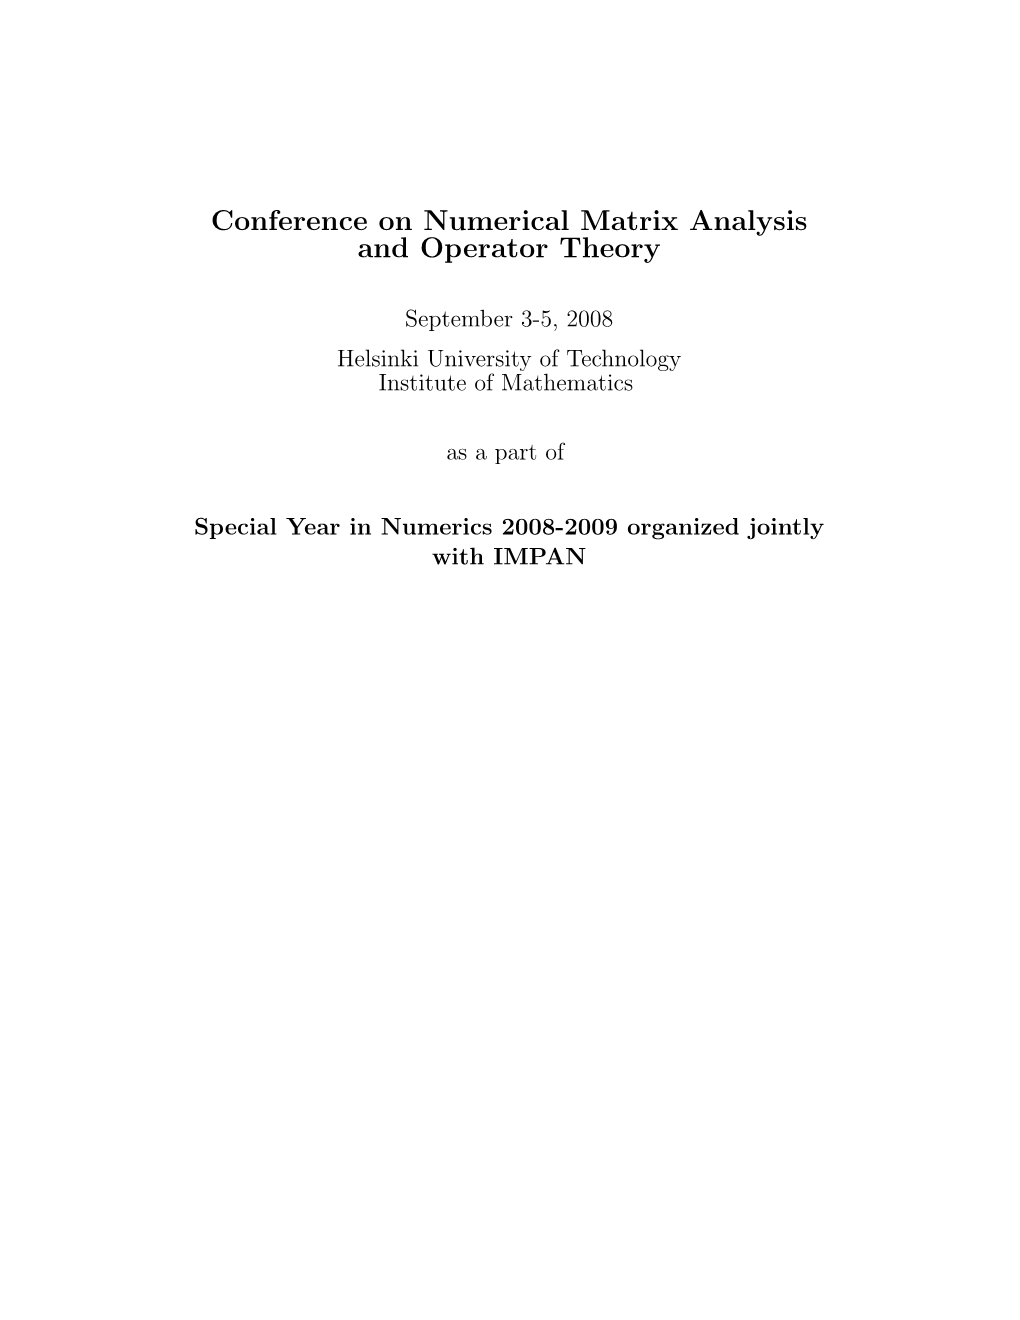 Conference on Numerical Matrix Analysis and Operator Theory